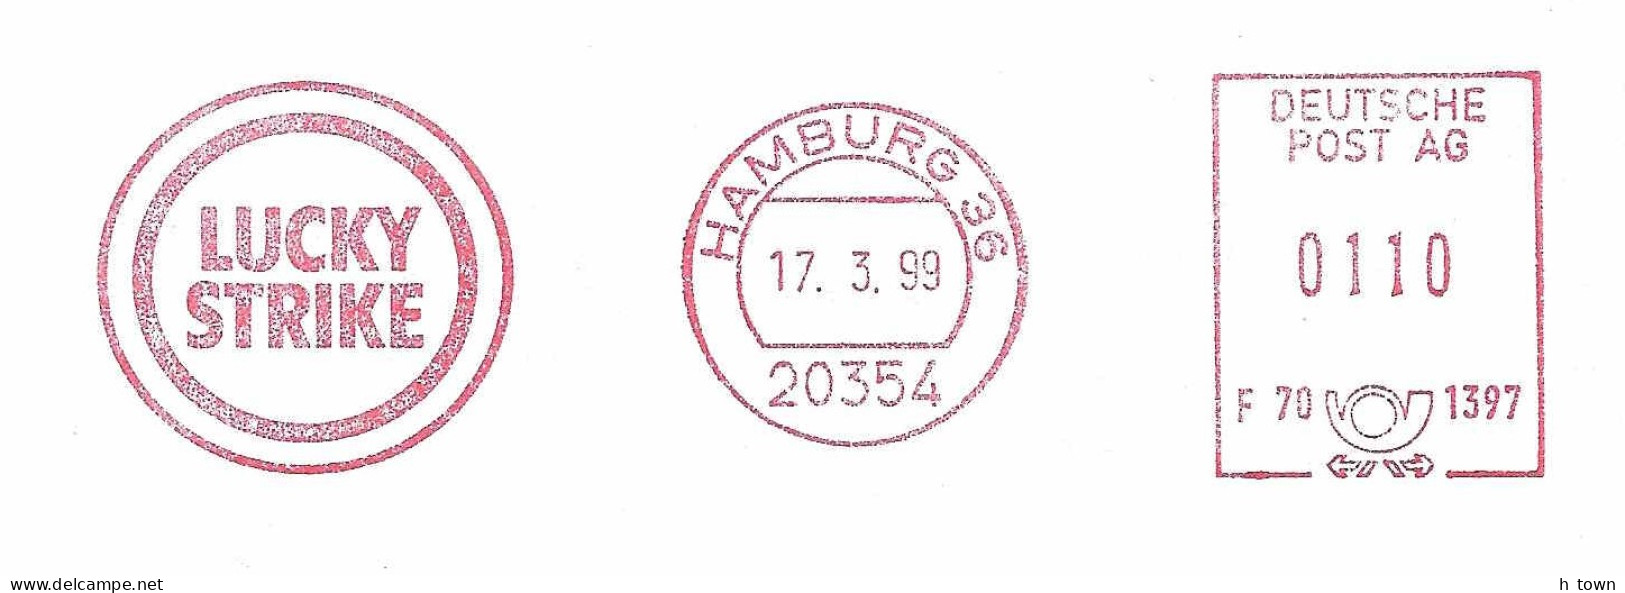 125  Tabac, Cigarette Lucky Strike: Ema D'Allemagne, 1999 - Tobacco Meter Stamp From Hamburg, Germany - Drogue